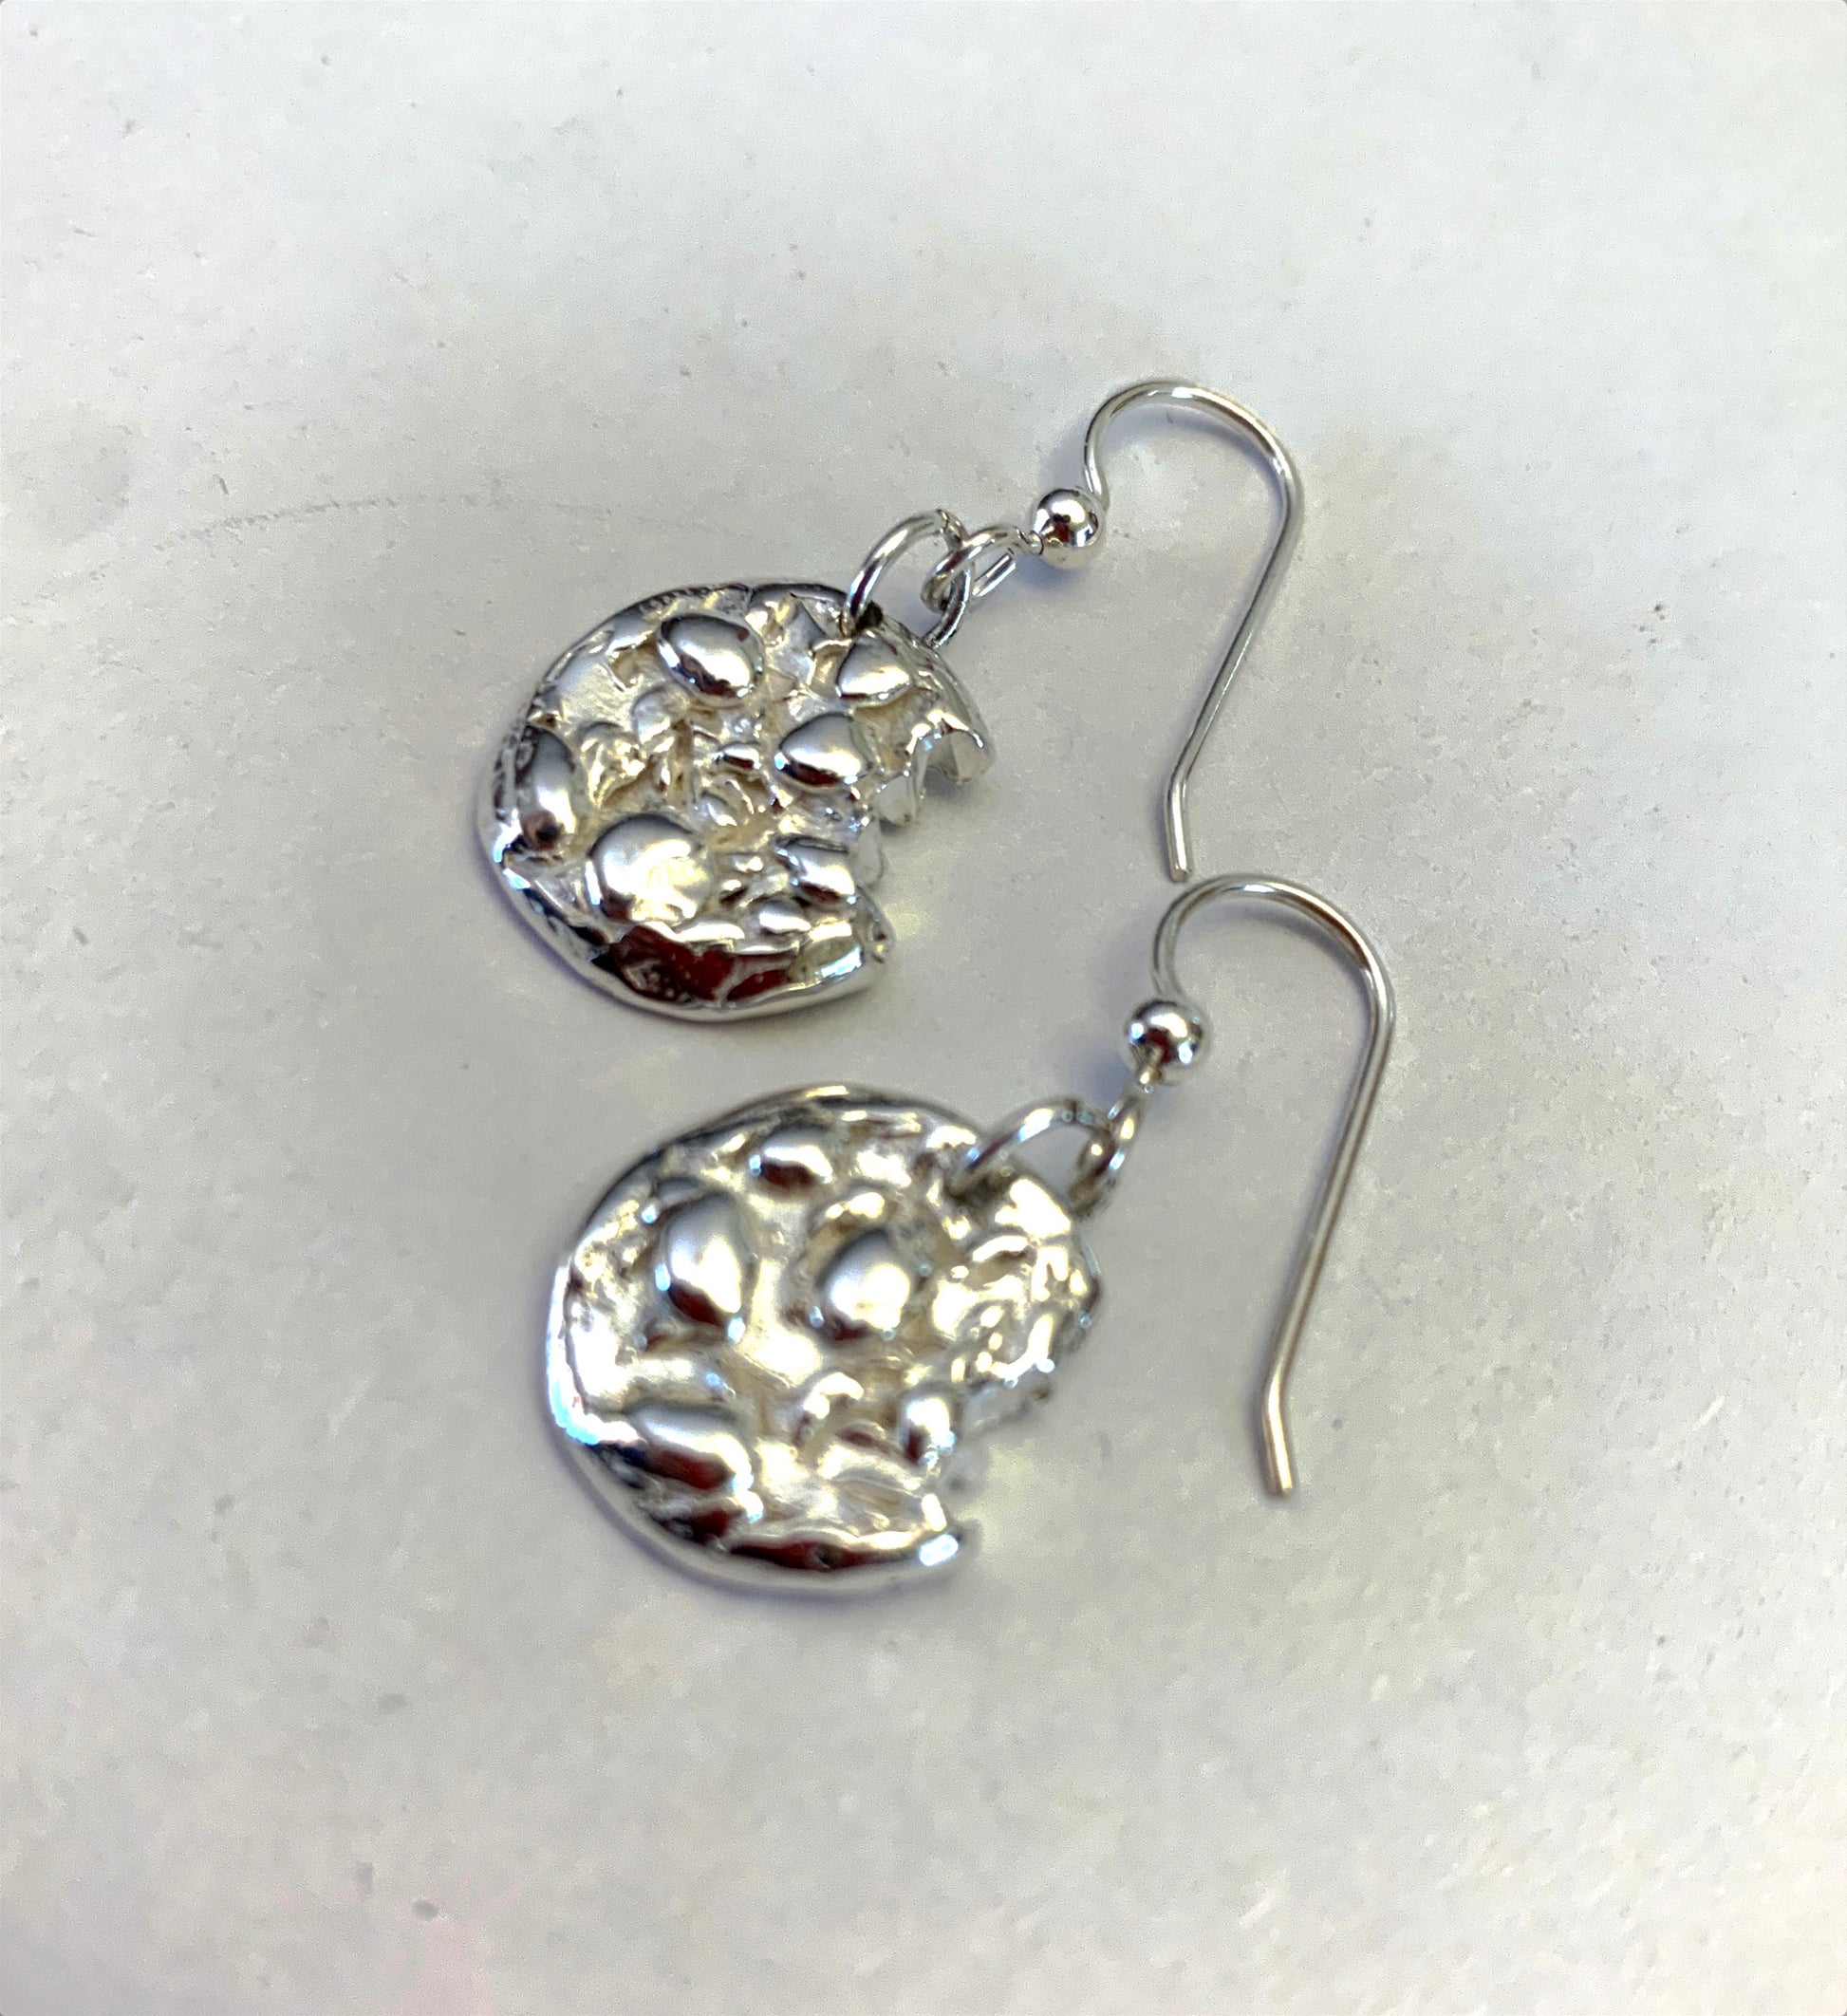 sterling silver oatmeal cookie dangle earrings with a bite taken out